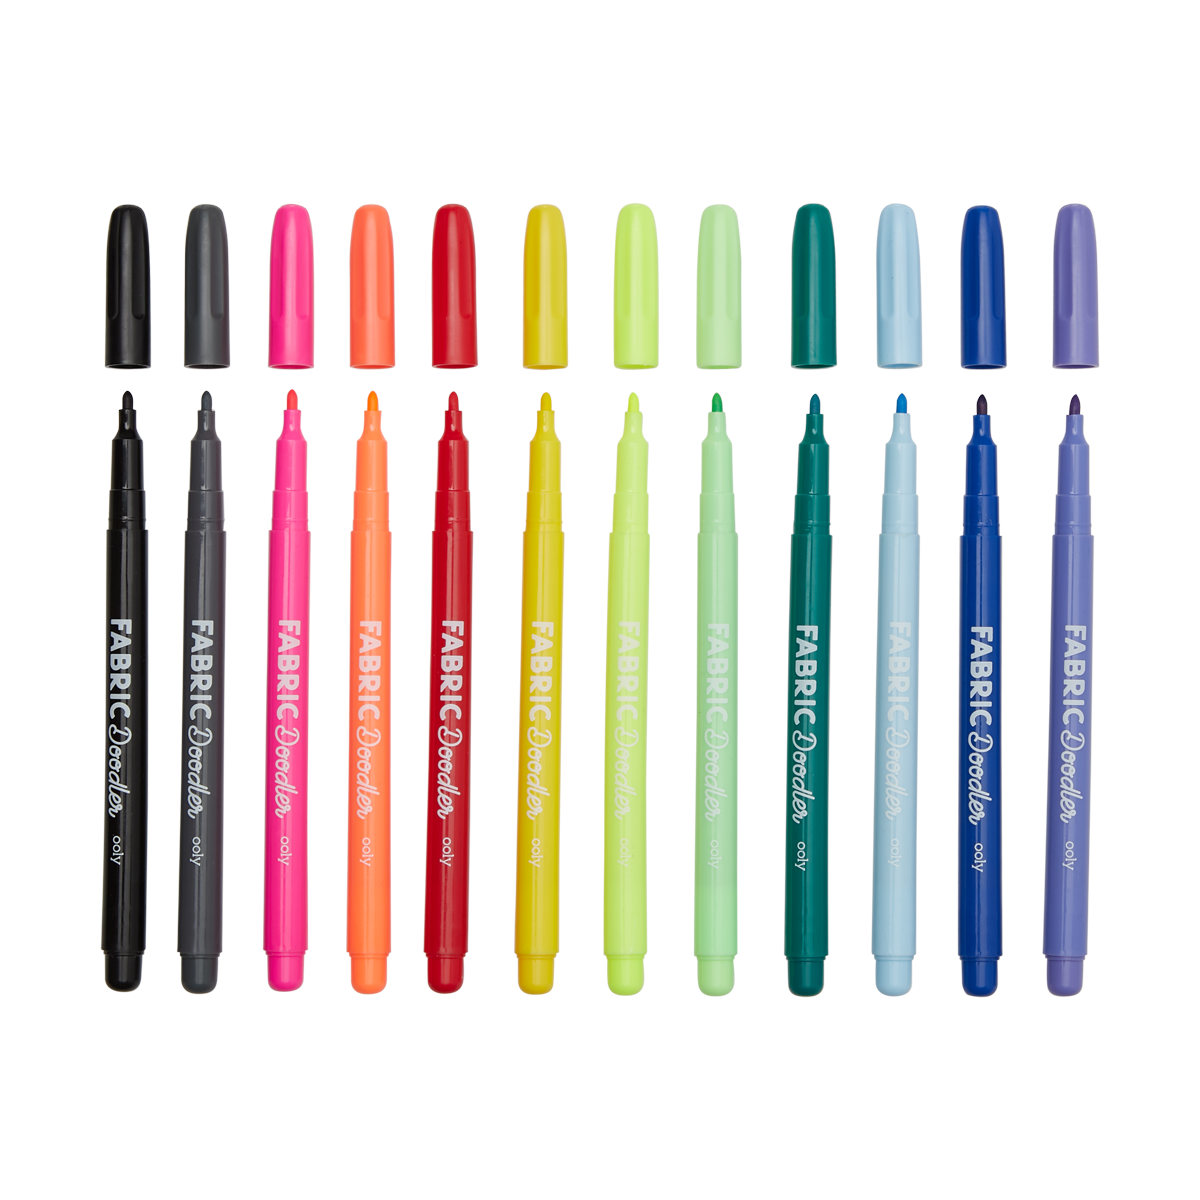 Buy Artline fabric marker pens (set of 6 different coloured pens) by fine  creations Online at Lowest Price Ever in India | Check Reviews & Ratings -  Shop The World